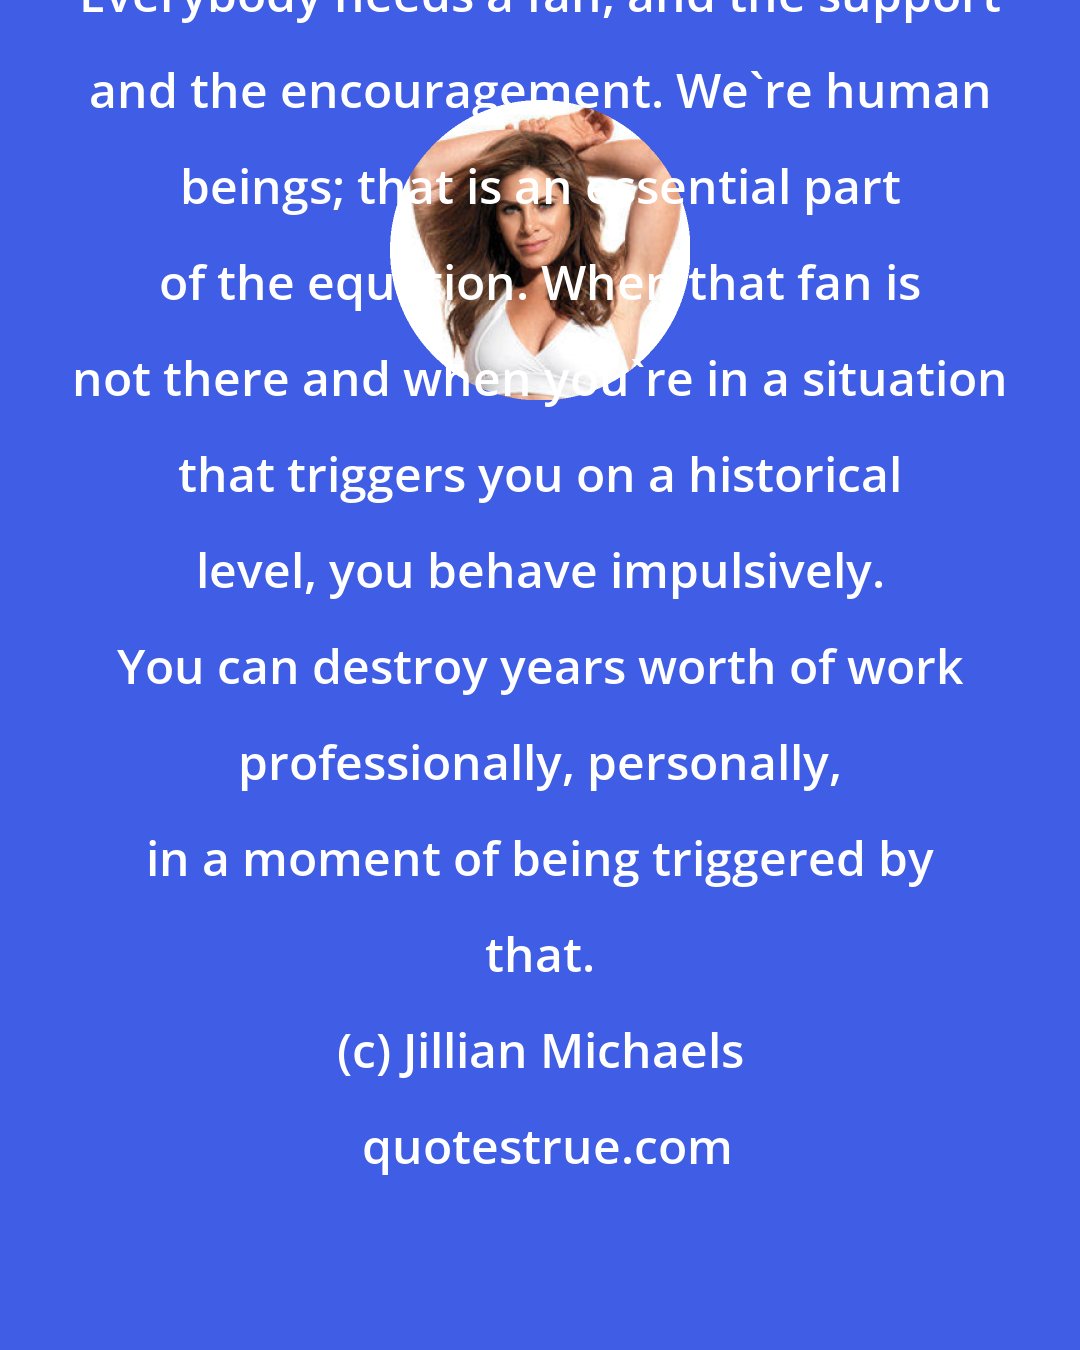 Jillian Michaels: Everybody needs a fan, and the support and the encouragement. We're human beings; that is an essential part of the equation. When that fan is not there and when you're in a situation that triggers you on a historical level, you behave impulsively. You can destroy years worth of work professionally, personally, in a moment of being triggered by that.